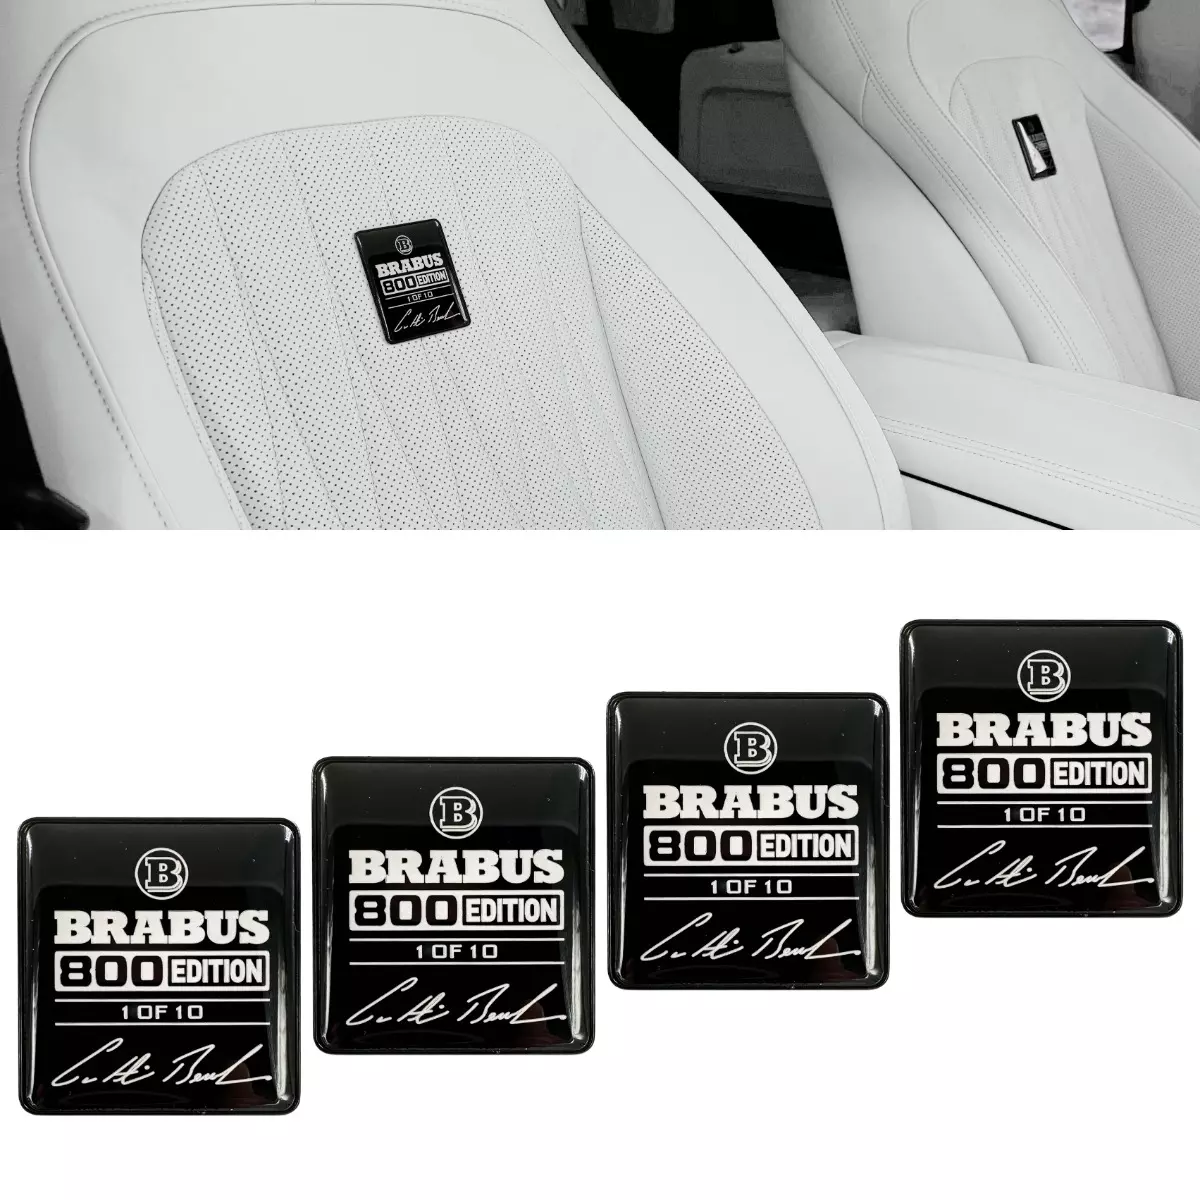 Brabus 800 Edition 1 of 10 White Seat Emblems Set for Mercedes-Benz W463A